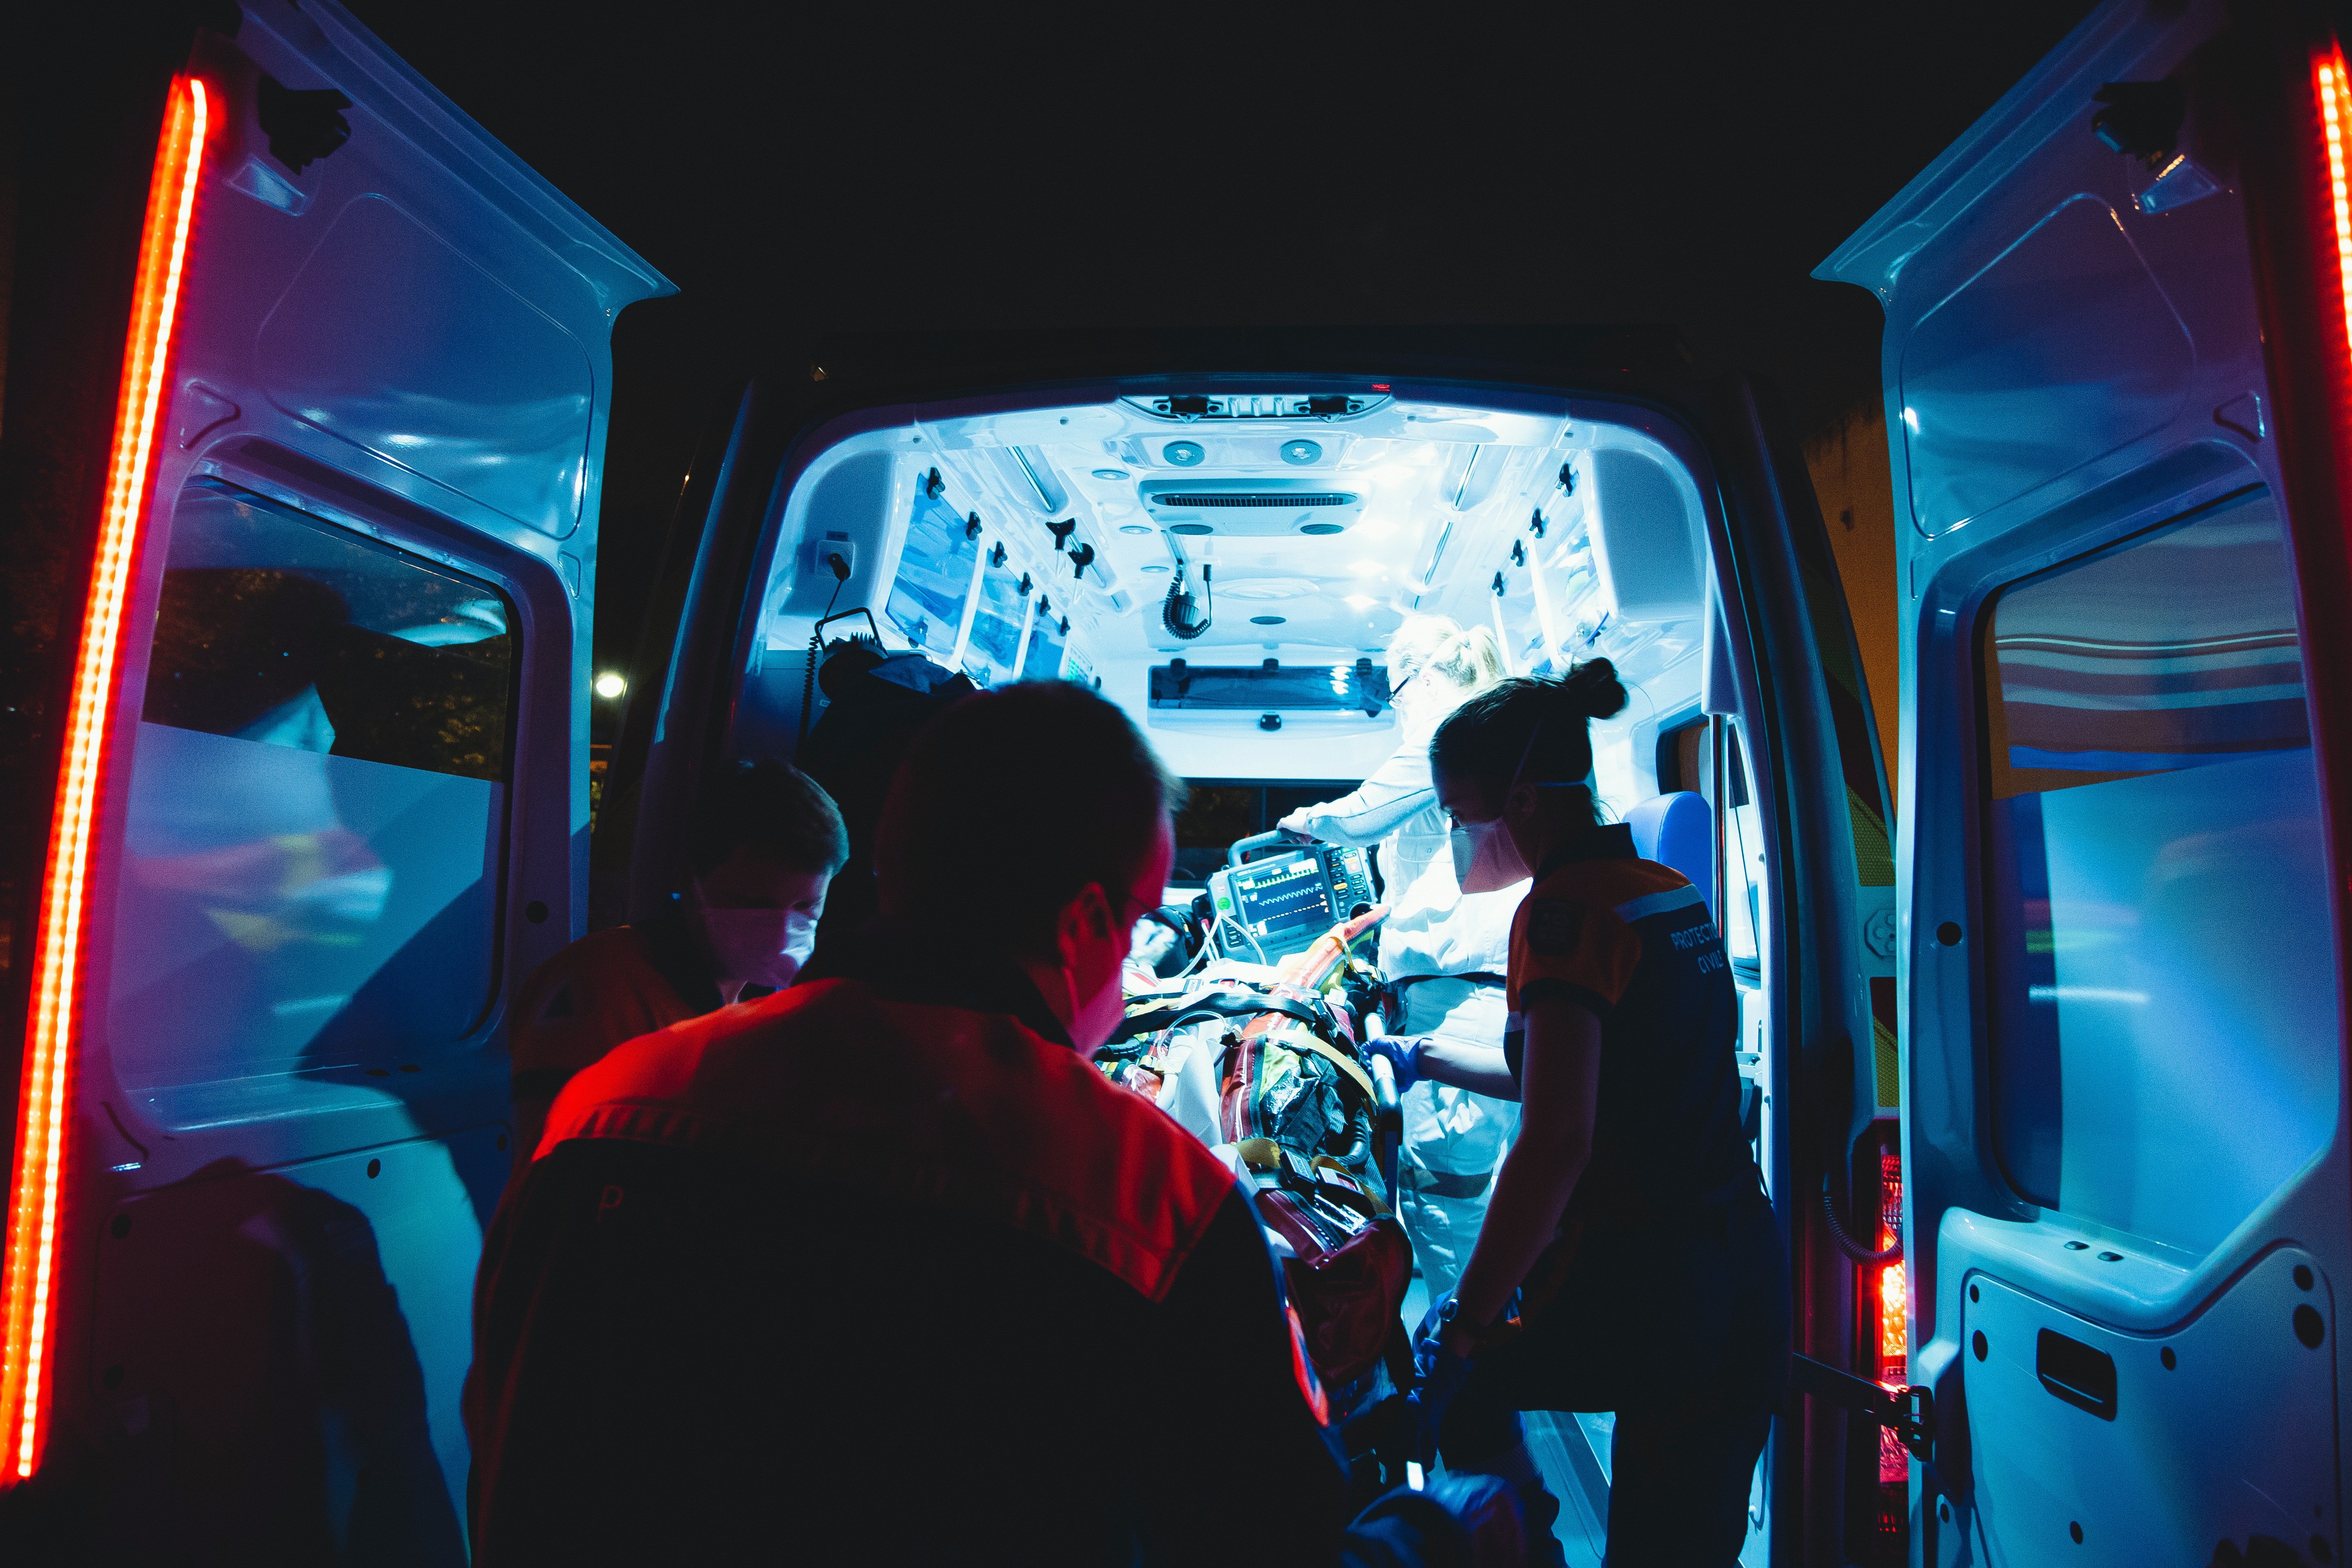 A neighbor called an ambulance for Mrs. Doeres.  |  Source: Unsplash